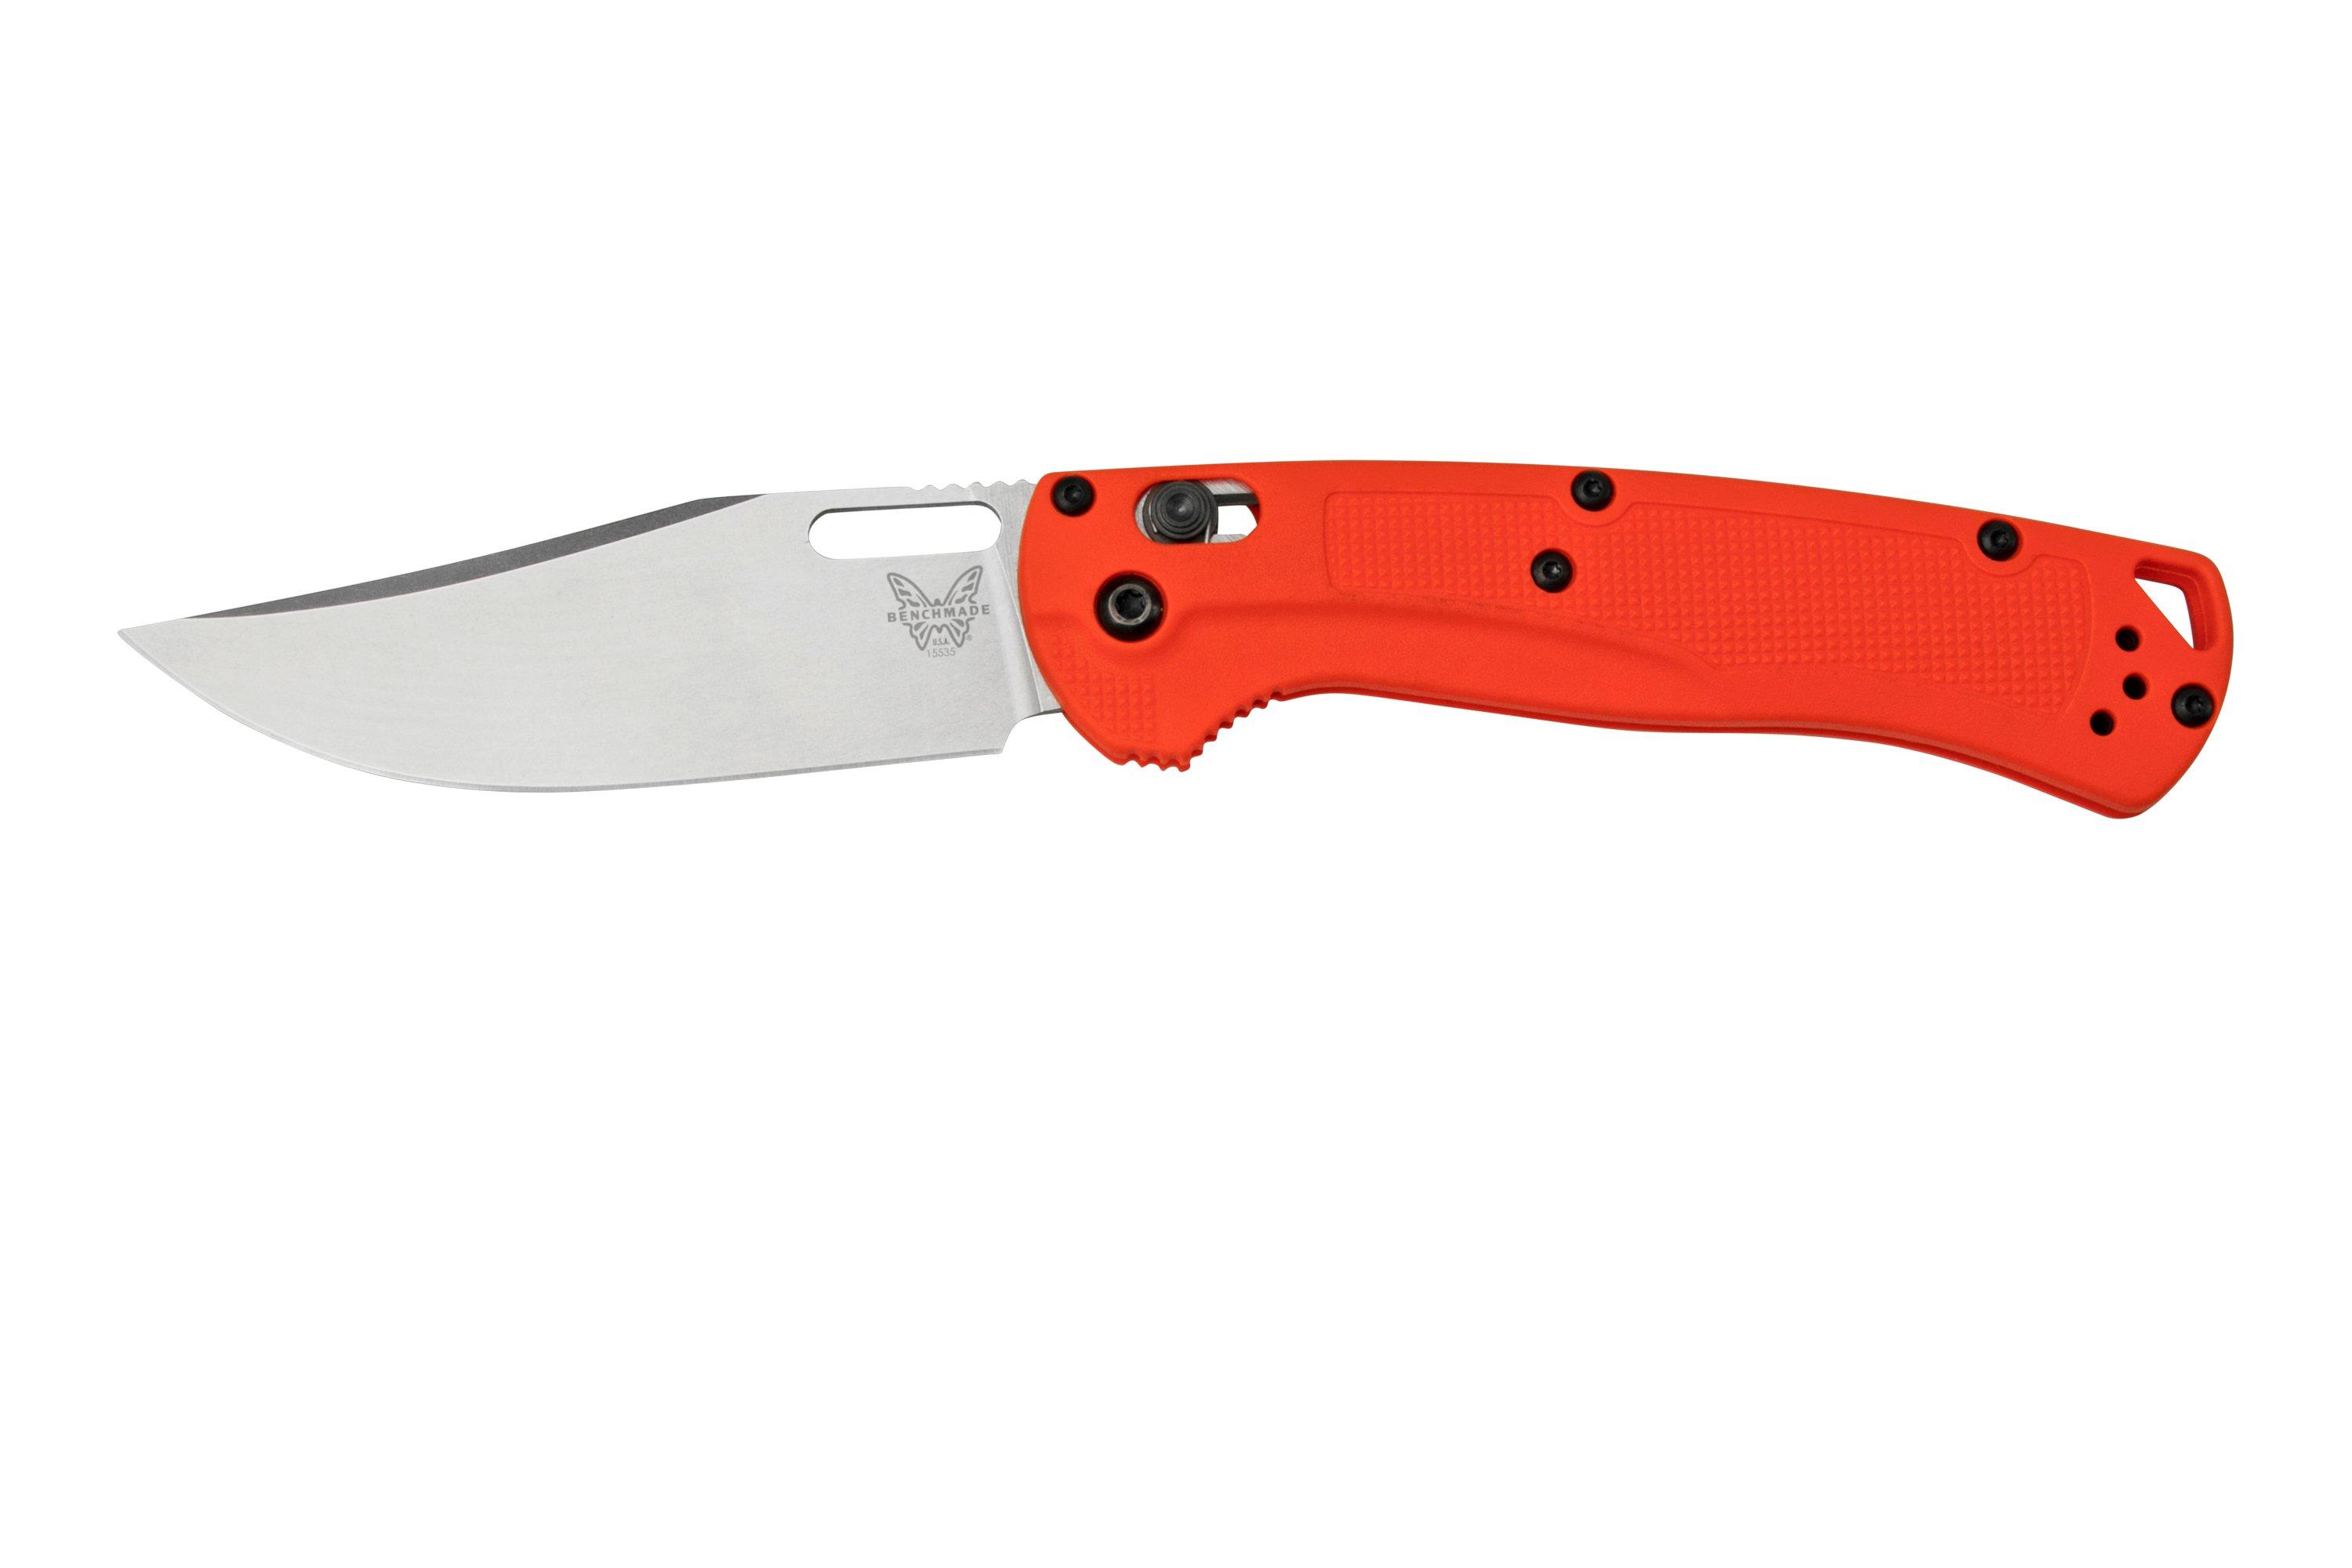 Benchmade Knives: 15535 Taggedout - AXIS Lock - Orange Grivory